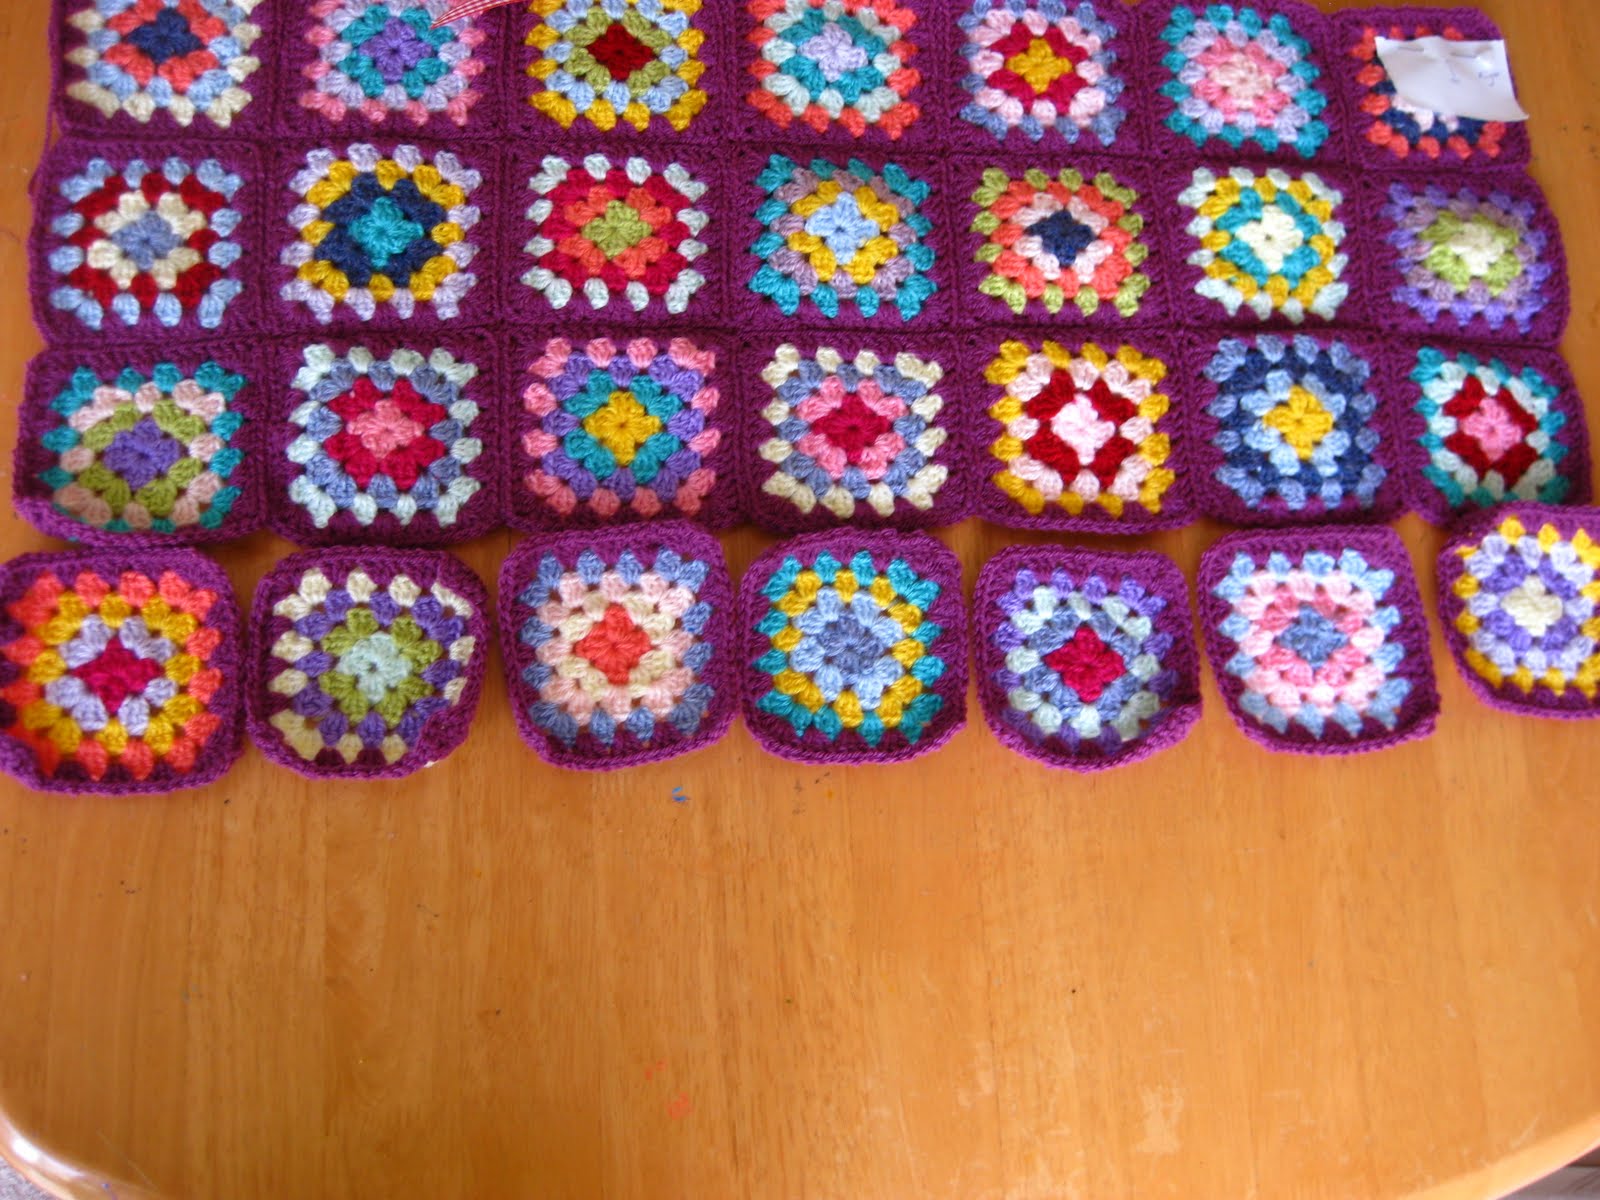 Simply Shoeboxes: DIY Crochet Granny Square Lovey and Purchased